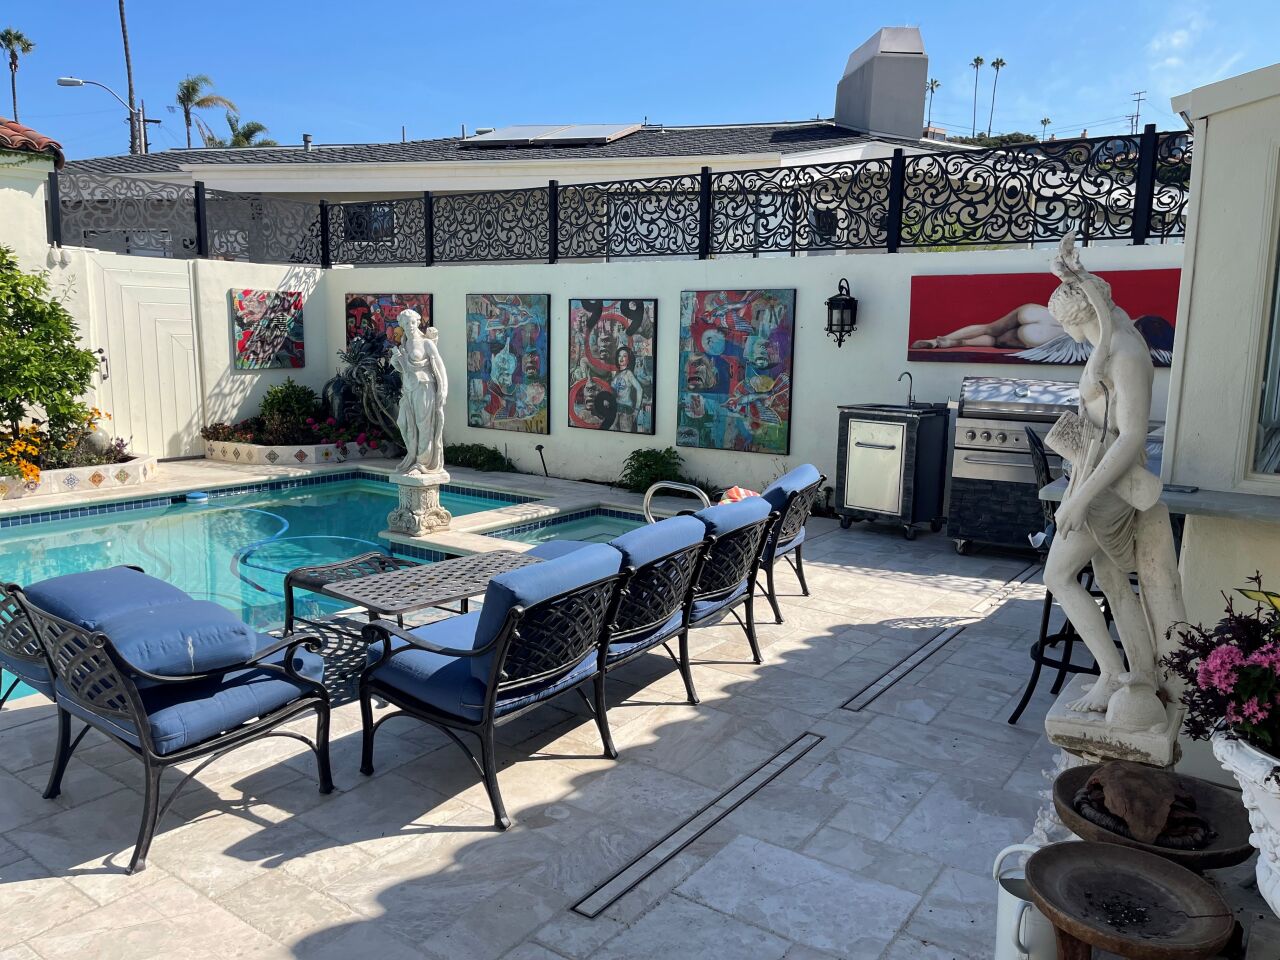 The Spanish-style courtyard at artist Dottie Stanley's La Jolla home features large artworks on the walls and multiple statues of mythical figures.